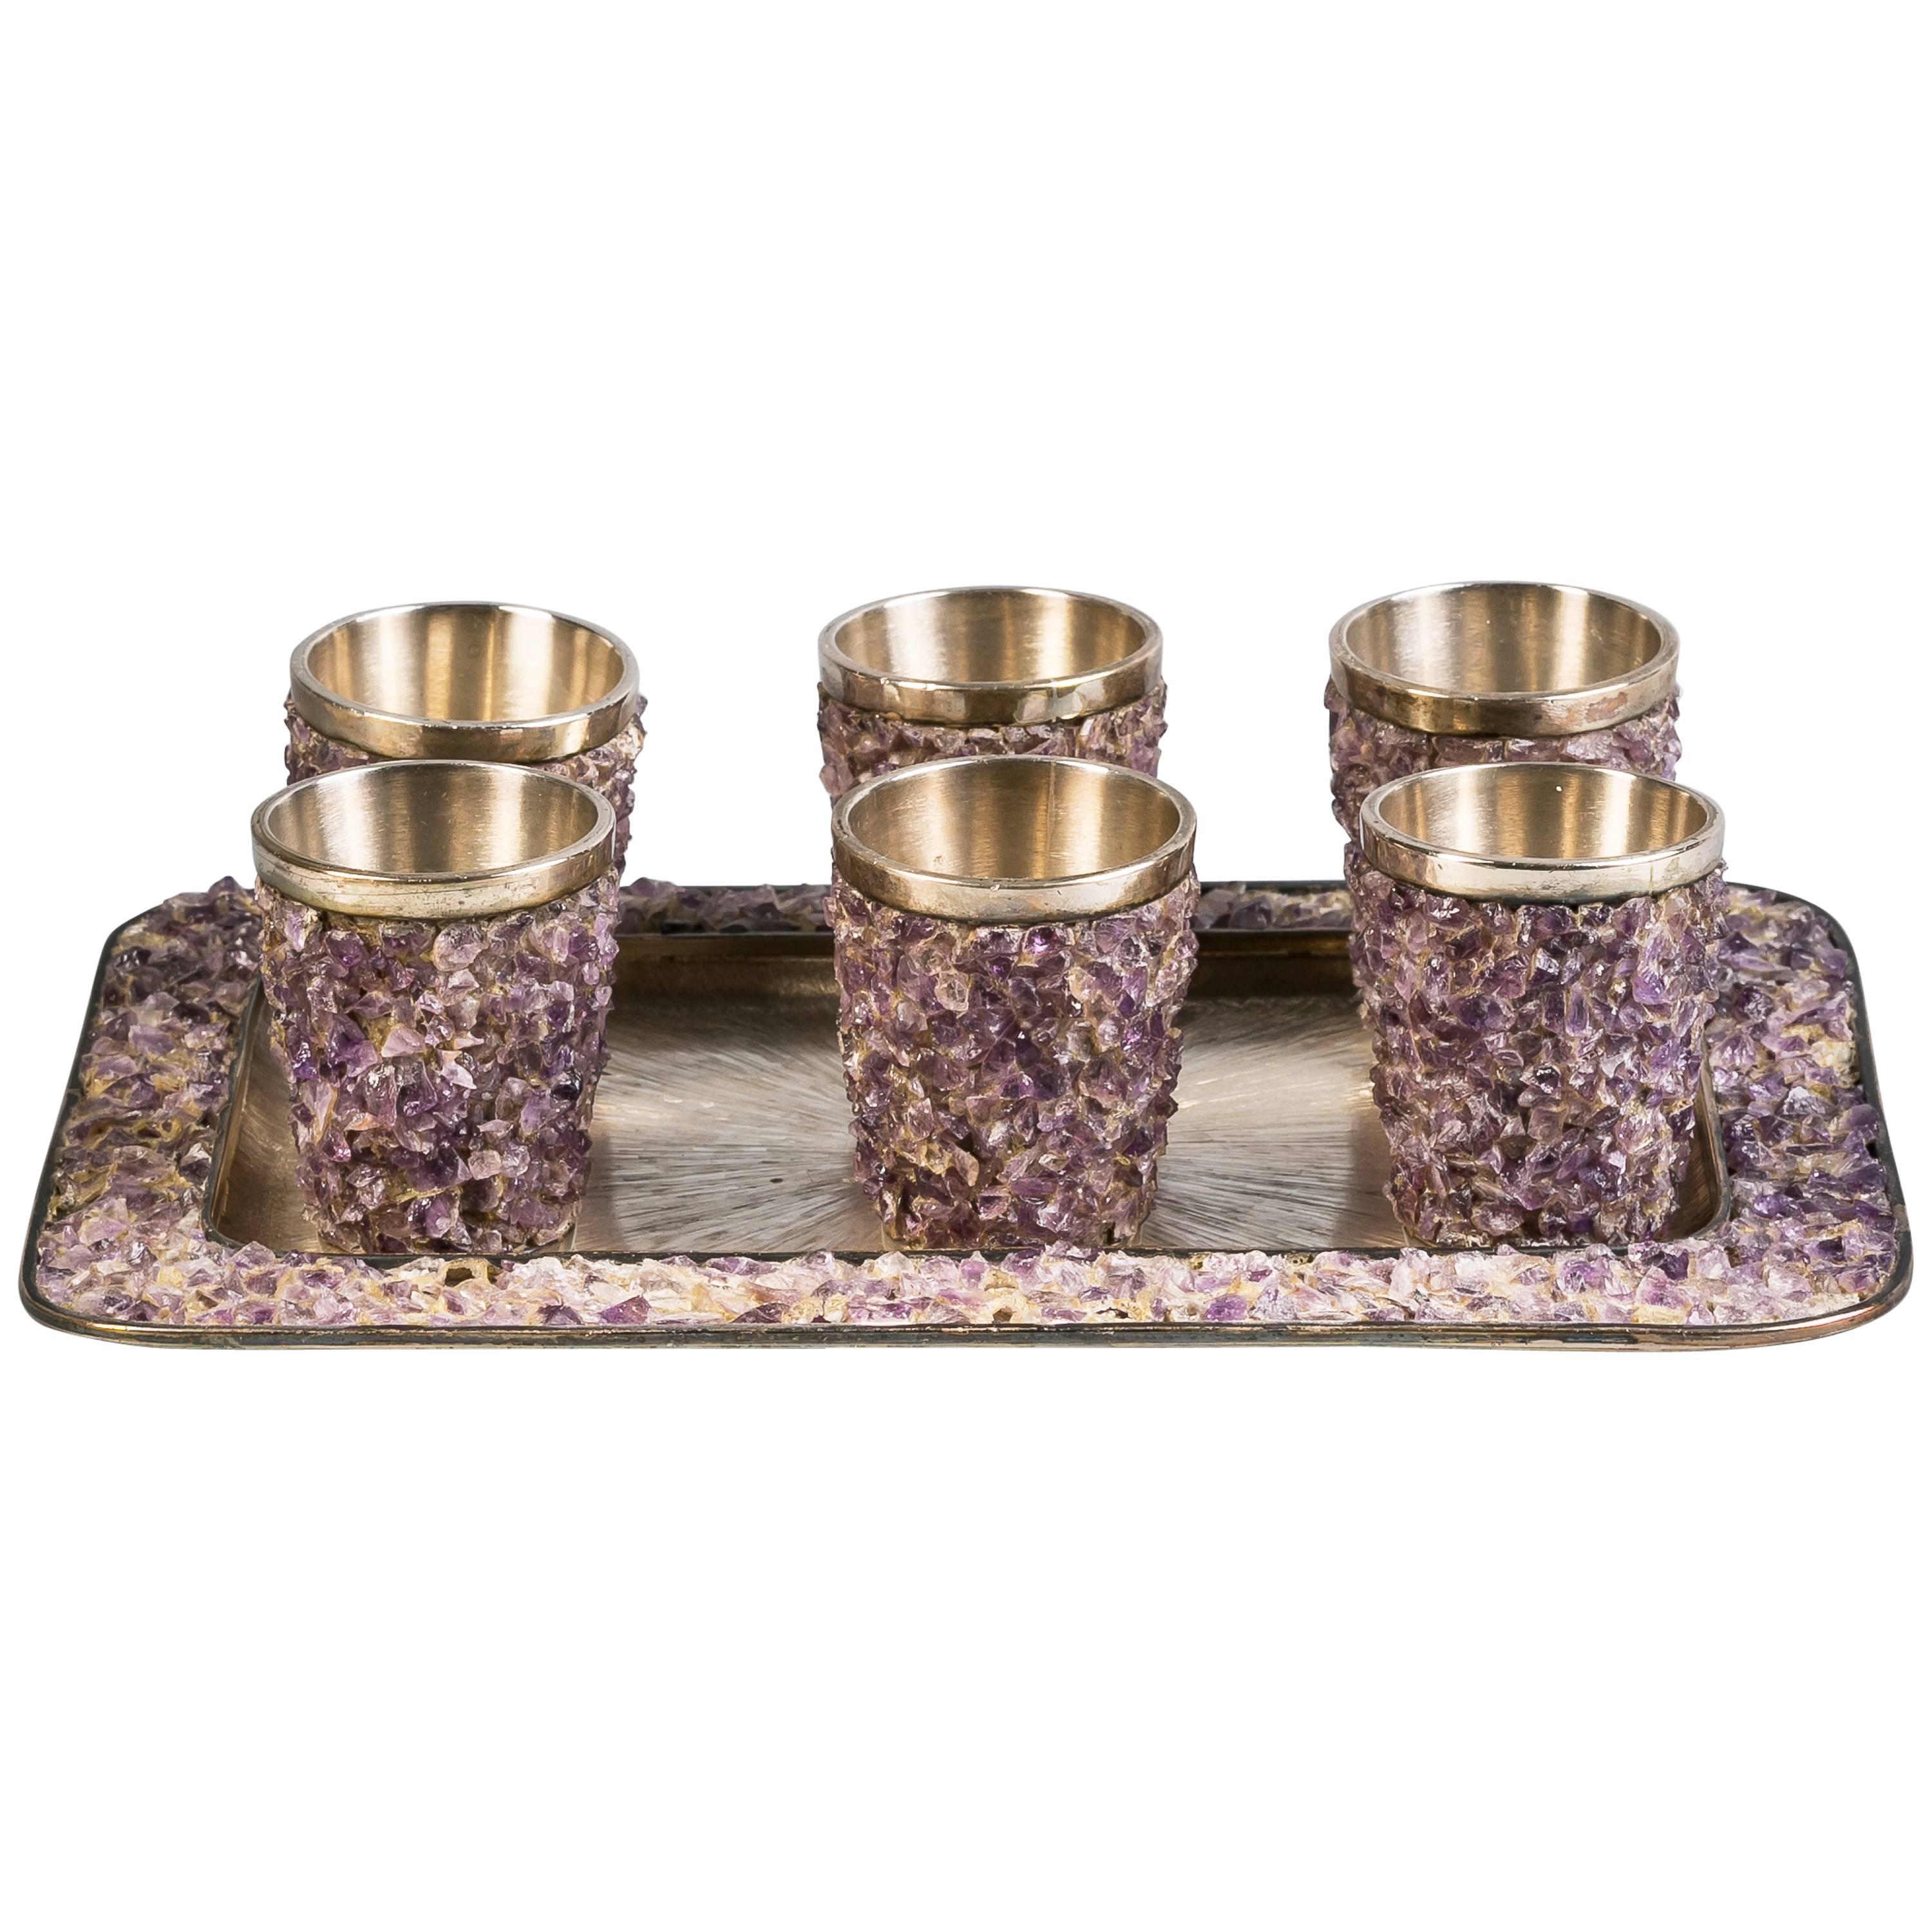 Set of Six Sterling Silver and Amethyst Quartz Shot Glasses and Tray